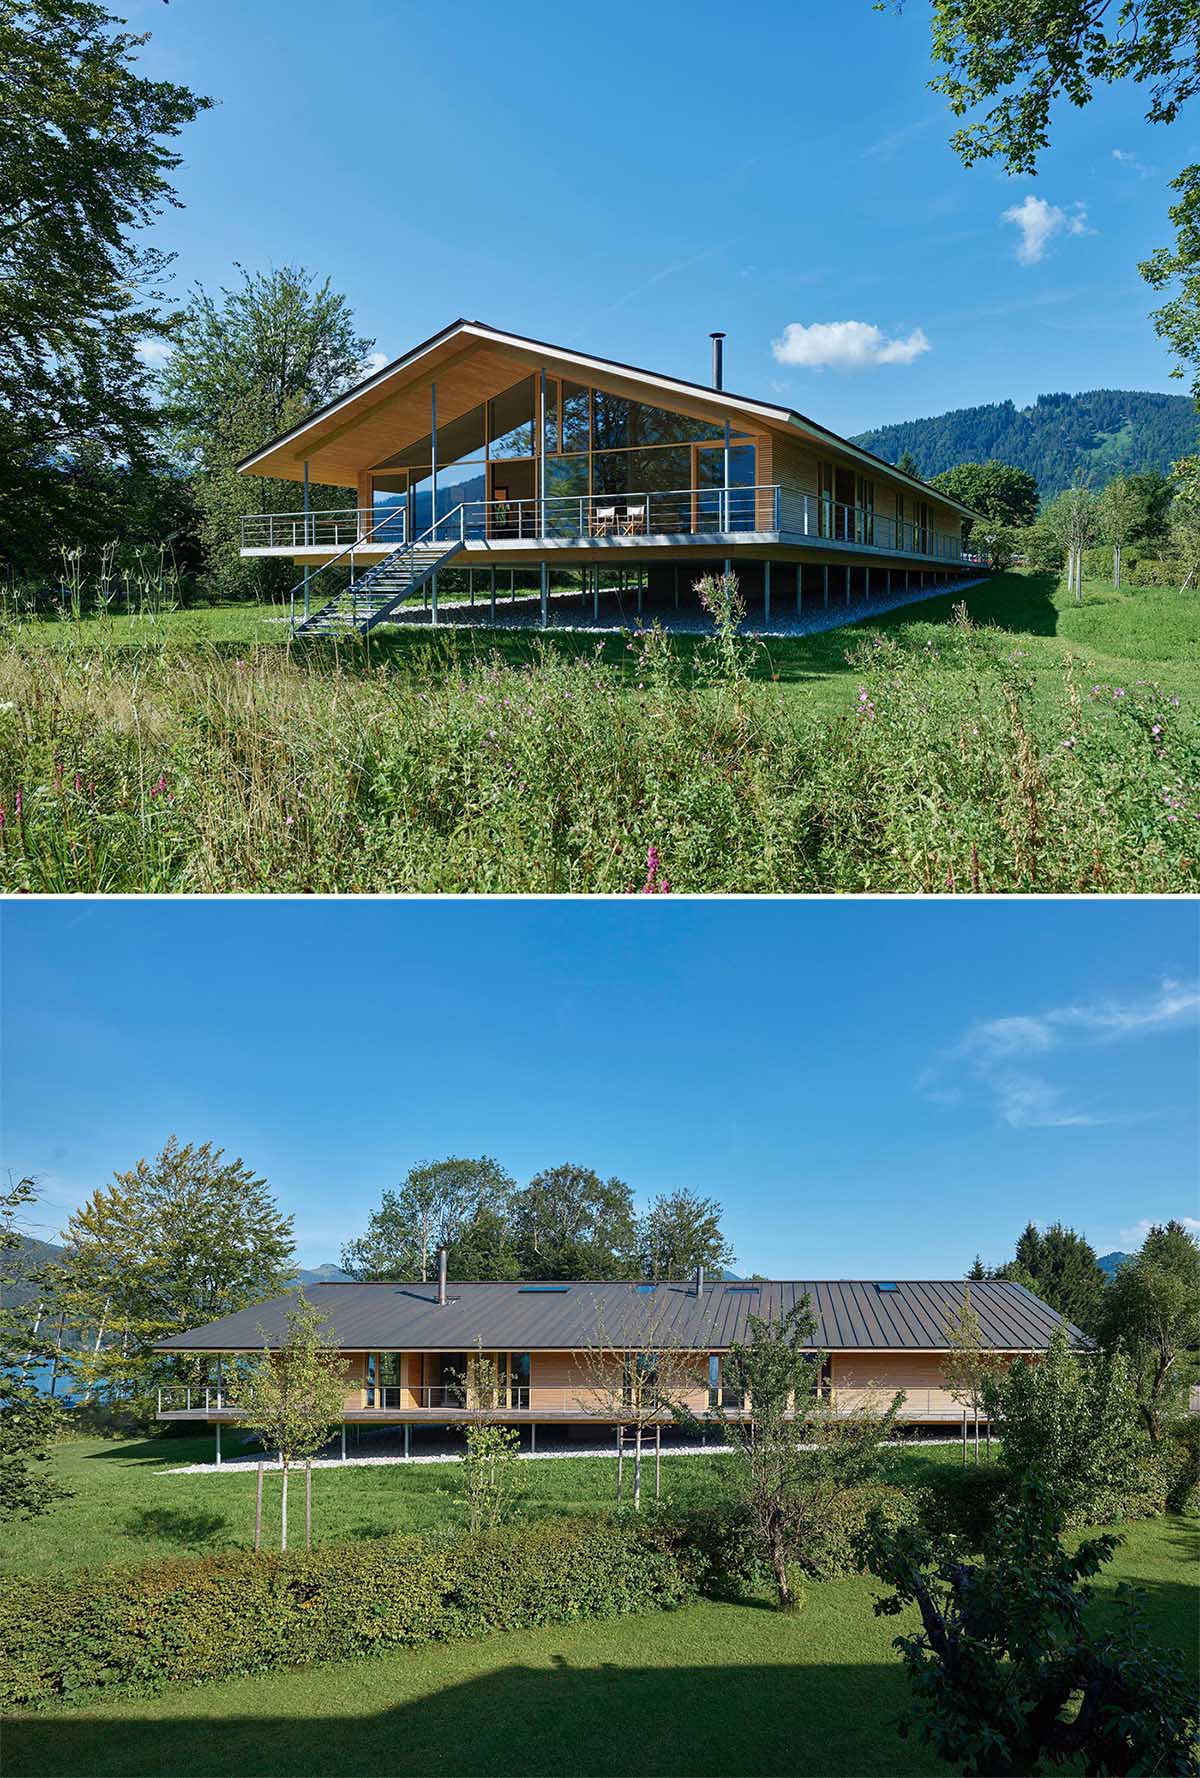 The timber construction of this modern house was mostly made from local woods, and is elevated on stilts to protect it from flood.